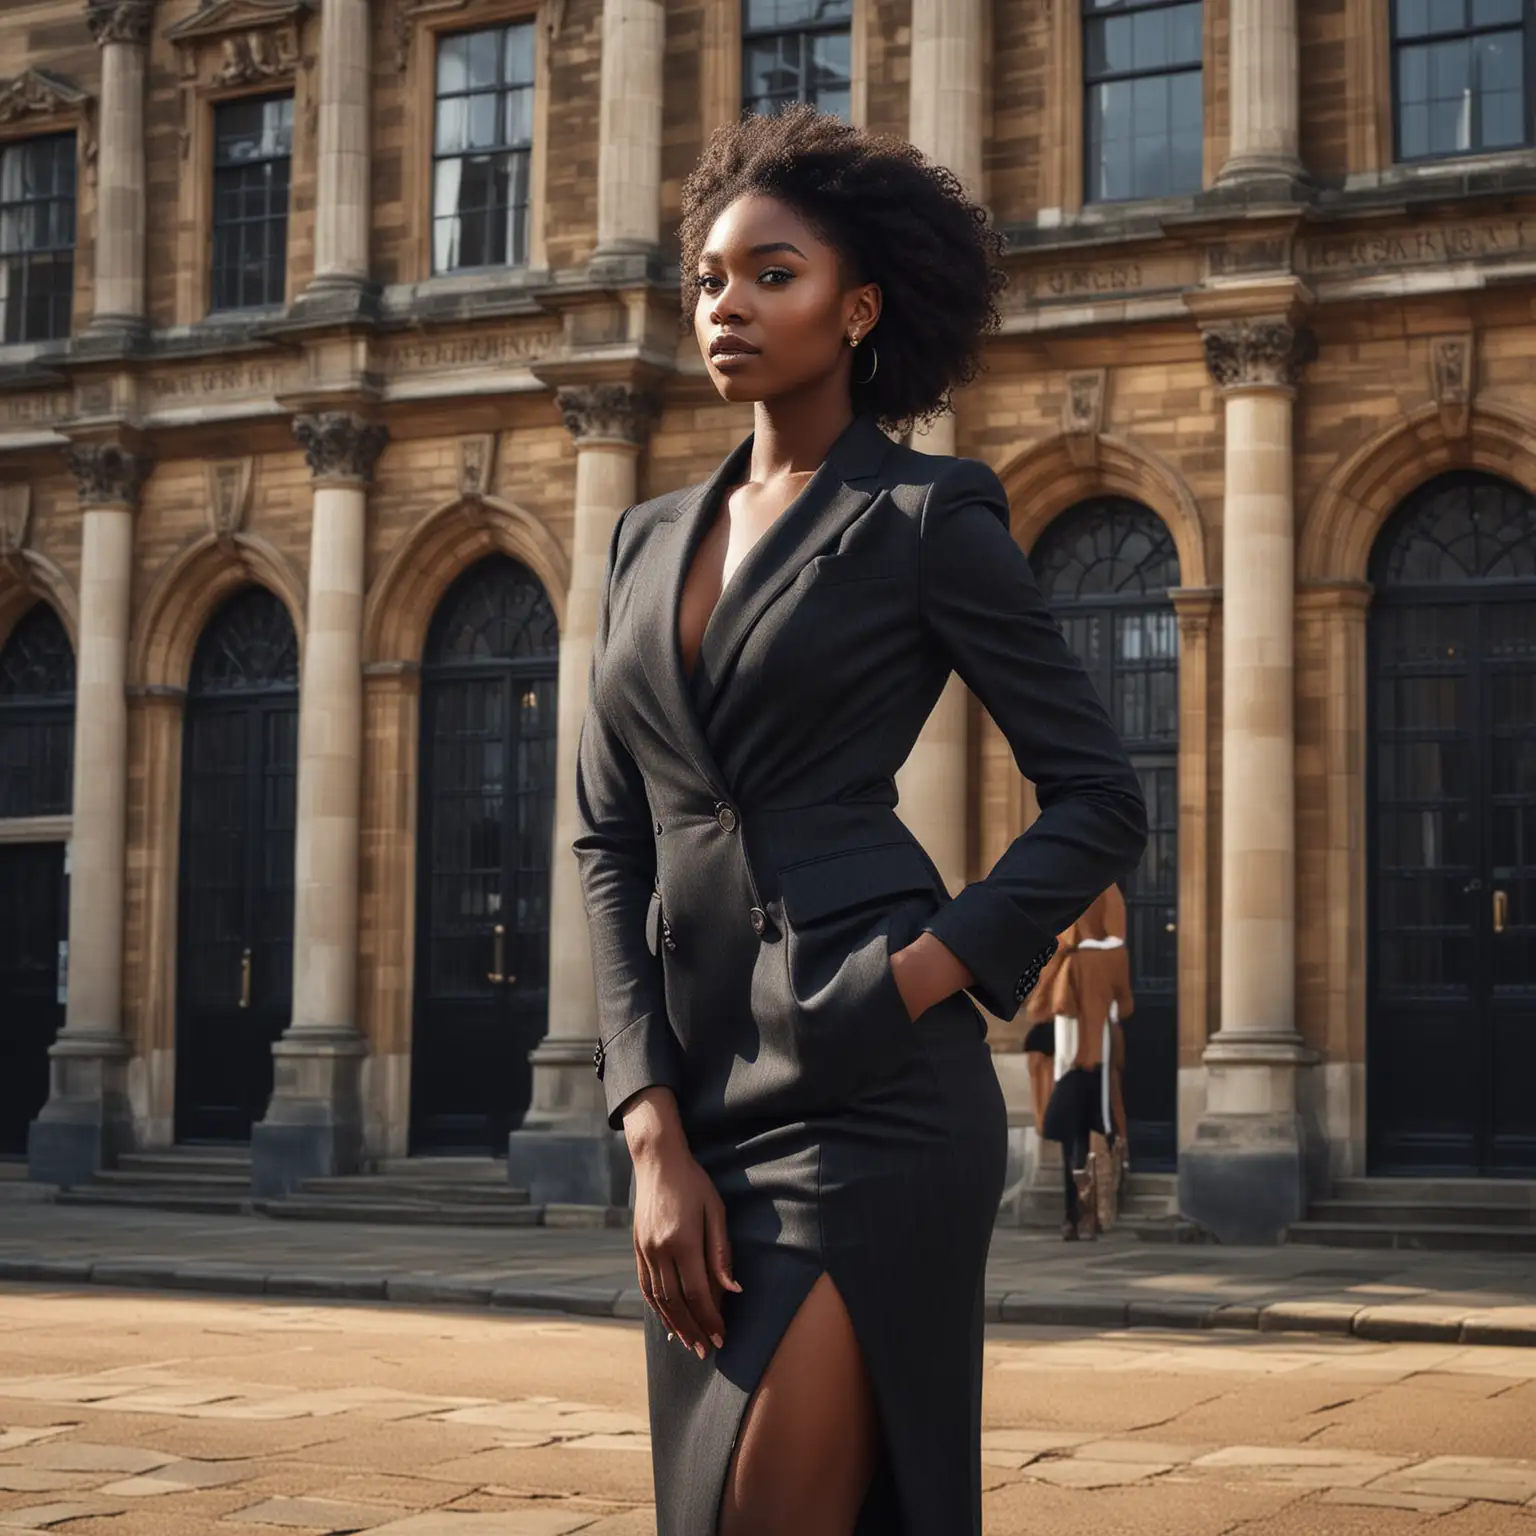 "A photorealistic portrait of a 26-year-old Nigerian woman, standing confidently in front of a prestigious university in the UK, with her ebony skin glowing against the historical architecture. She has luxurious, wavy black hair that cascades around her shoulders and deep black eyes that exude intelligence and warmth. Her style is the epitome of professional grace, dressed in a modest, tailored gown beneath a sleek blazer, complemented by elegant high-heel shoes. The image is captured in 8k HDR, offering an extraordinary level of detail from the texture of her attire to the expression of poised ambition on her face. The lighting is crisp and clear, highlighting her features with a high-quality finish, ensuring every detail from the surroundings to her natural beauty is vivid and engaging."